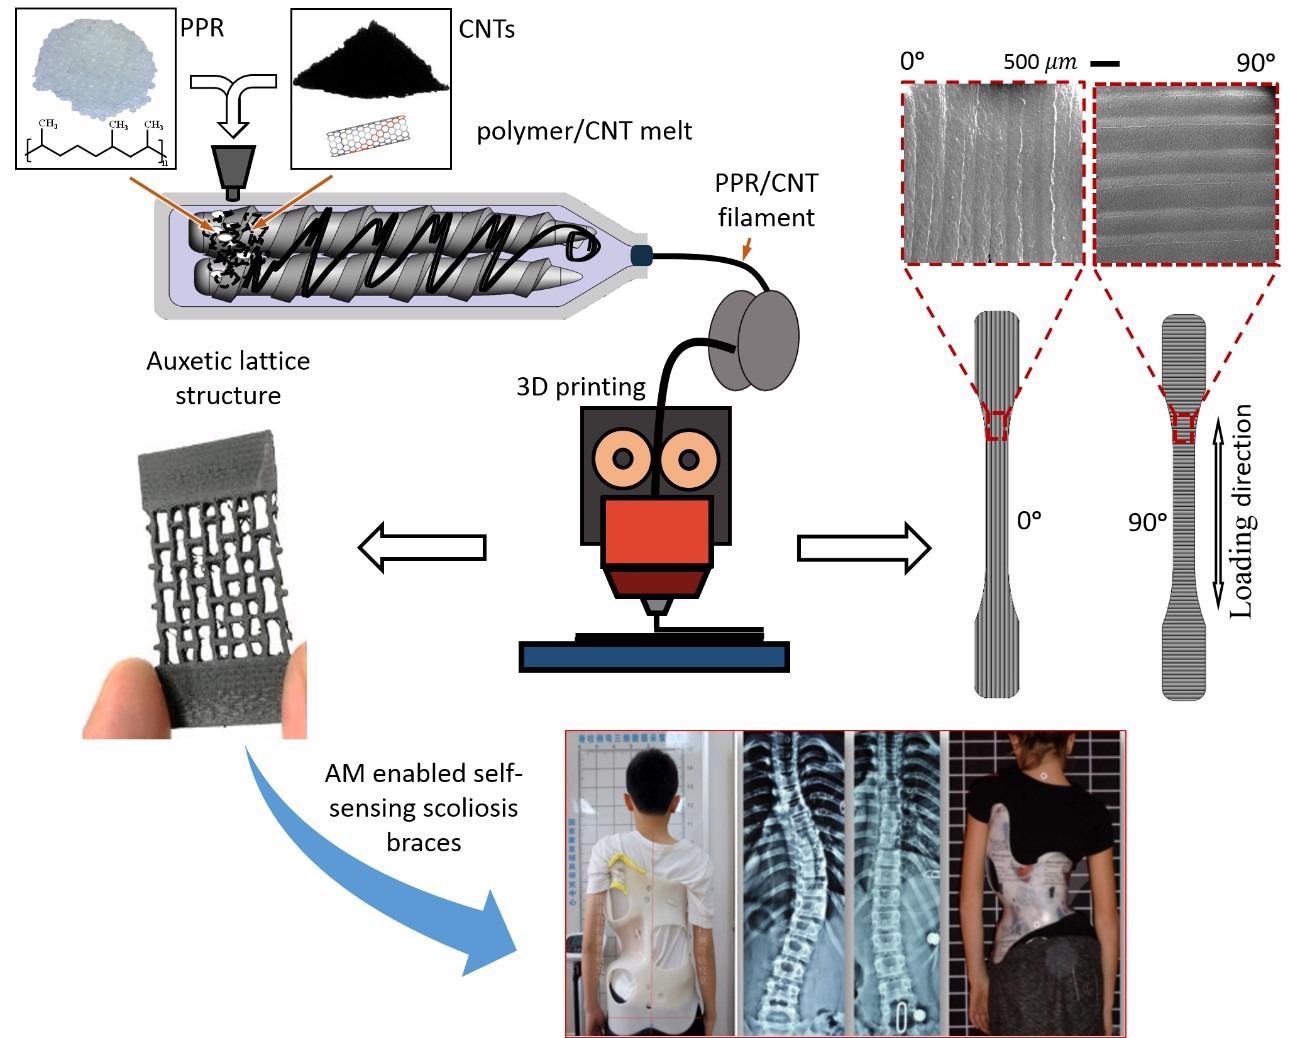 Researchers Invent “Smart” 3D-Printed Braces to Support Better Scoliosis Treatment Procedure